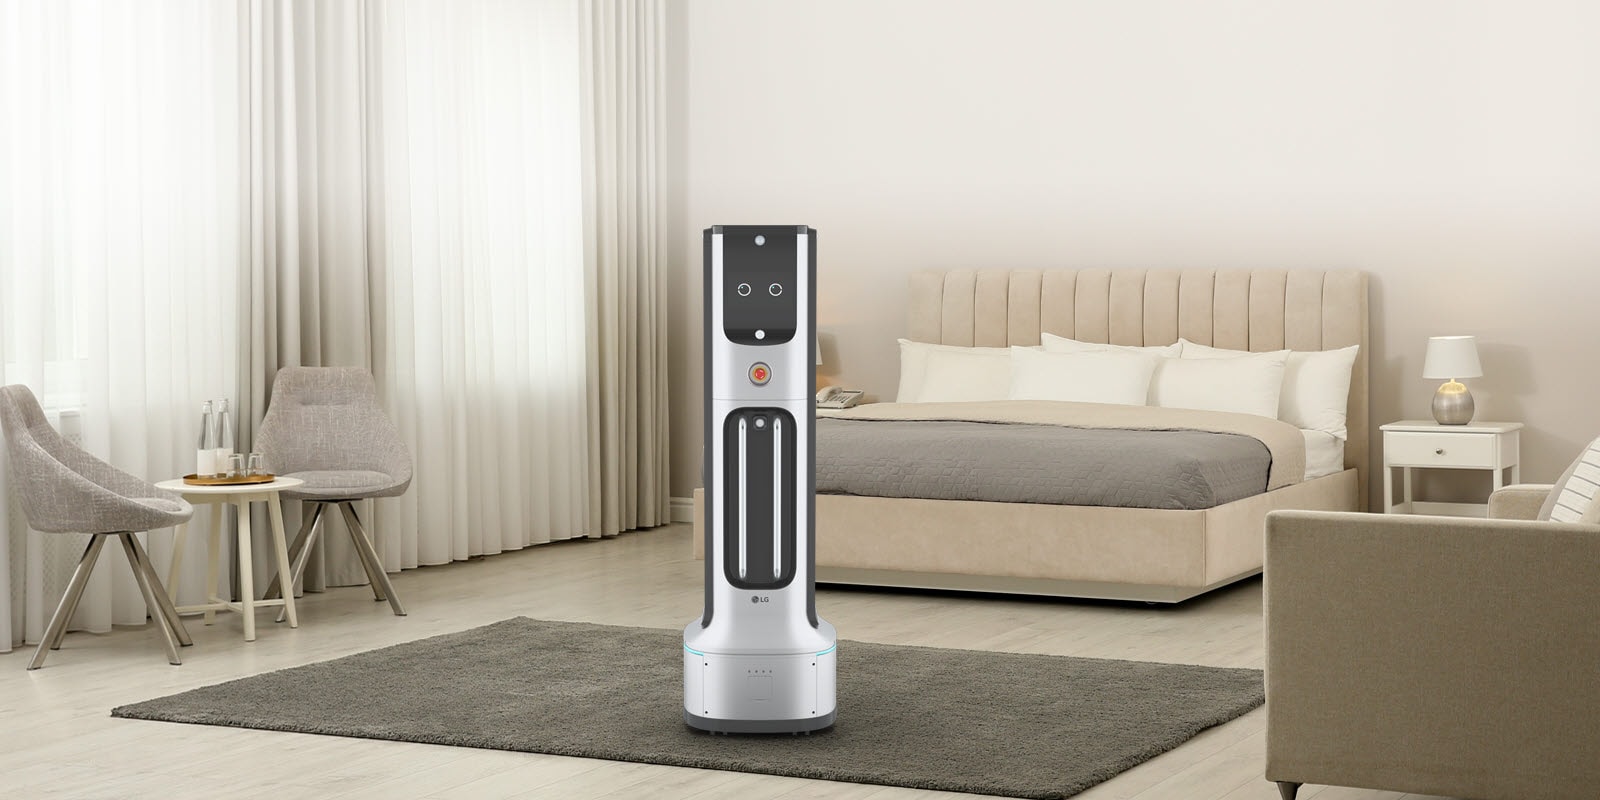 The powerful disinfection function creates a pleasant environment without worrying about infection.